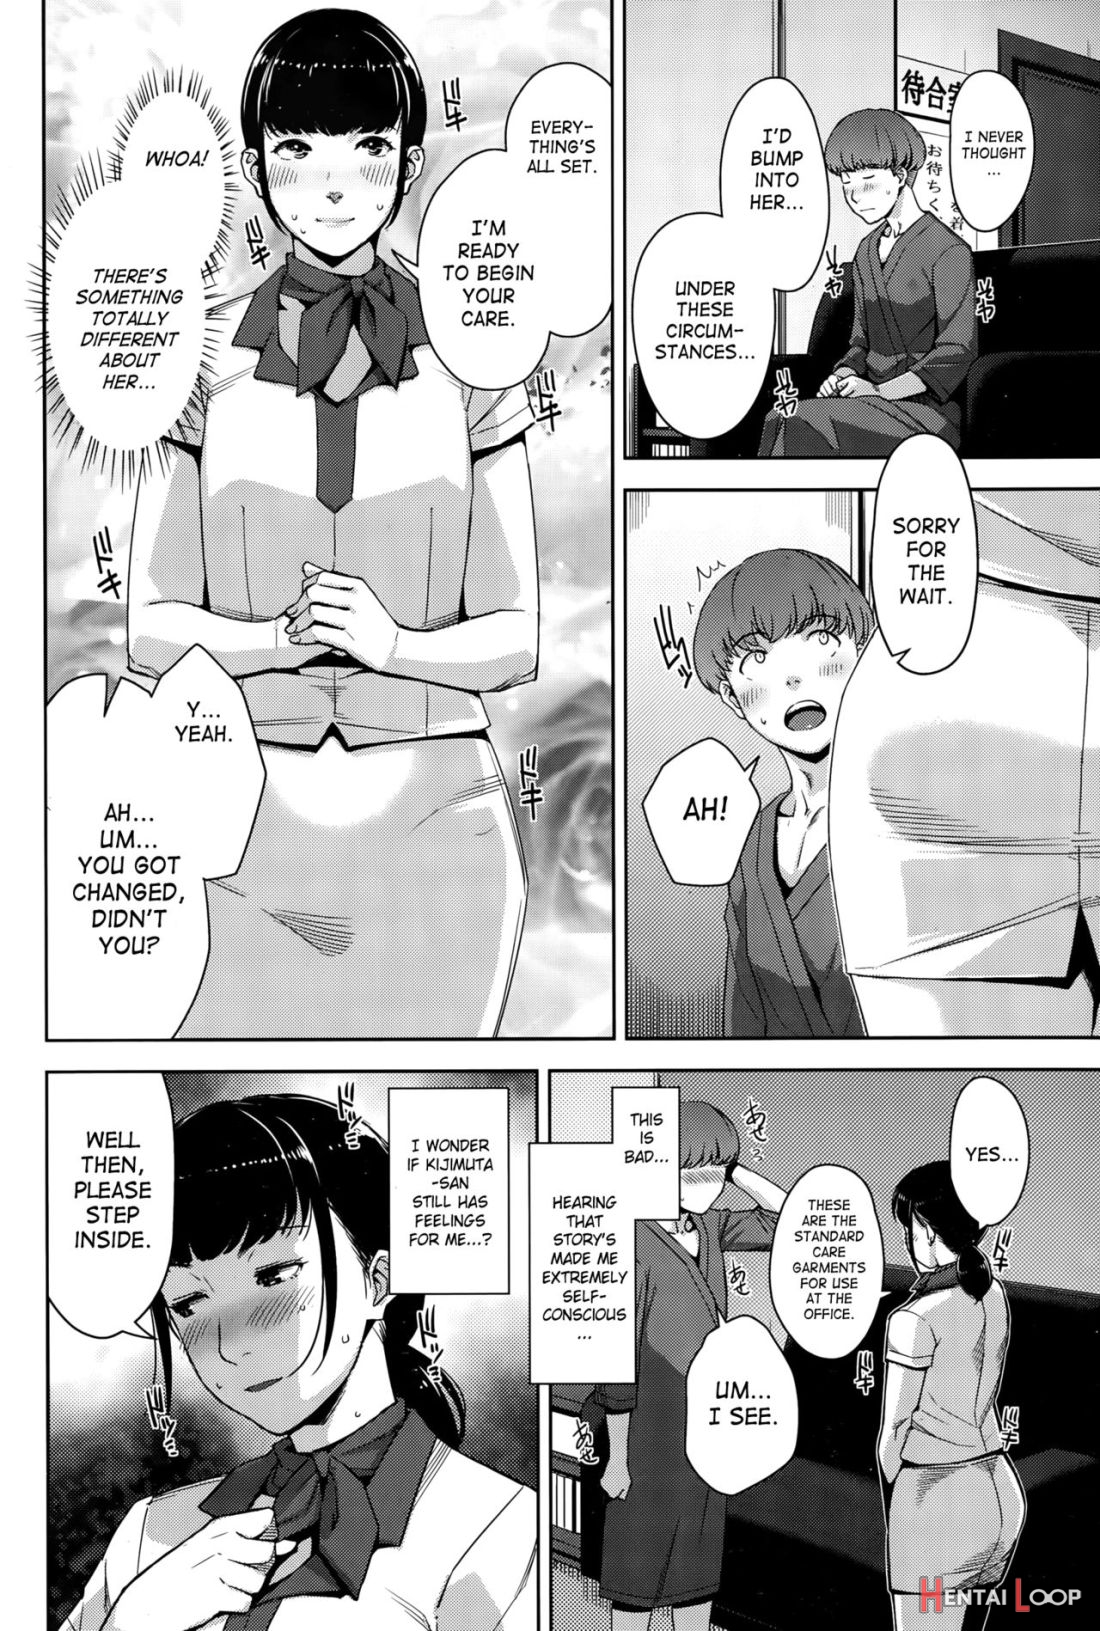 My Care Lady Ch. 3 page 6